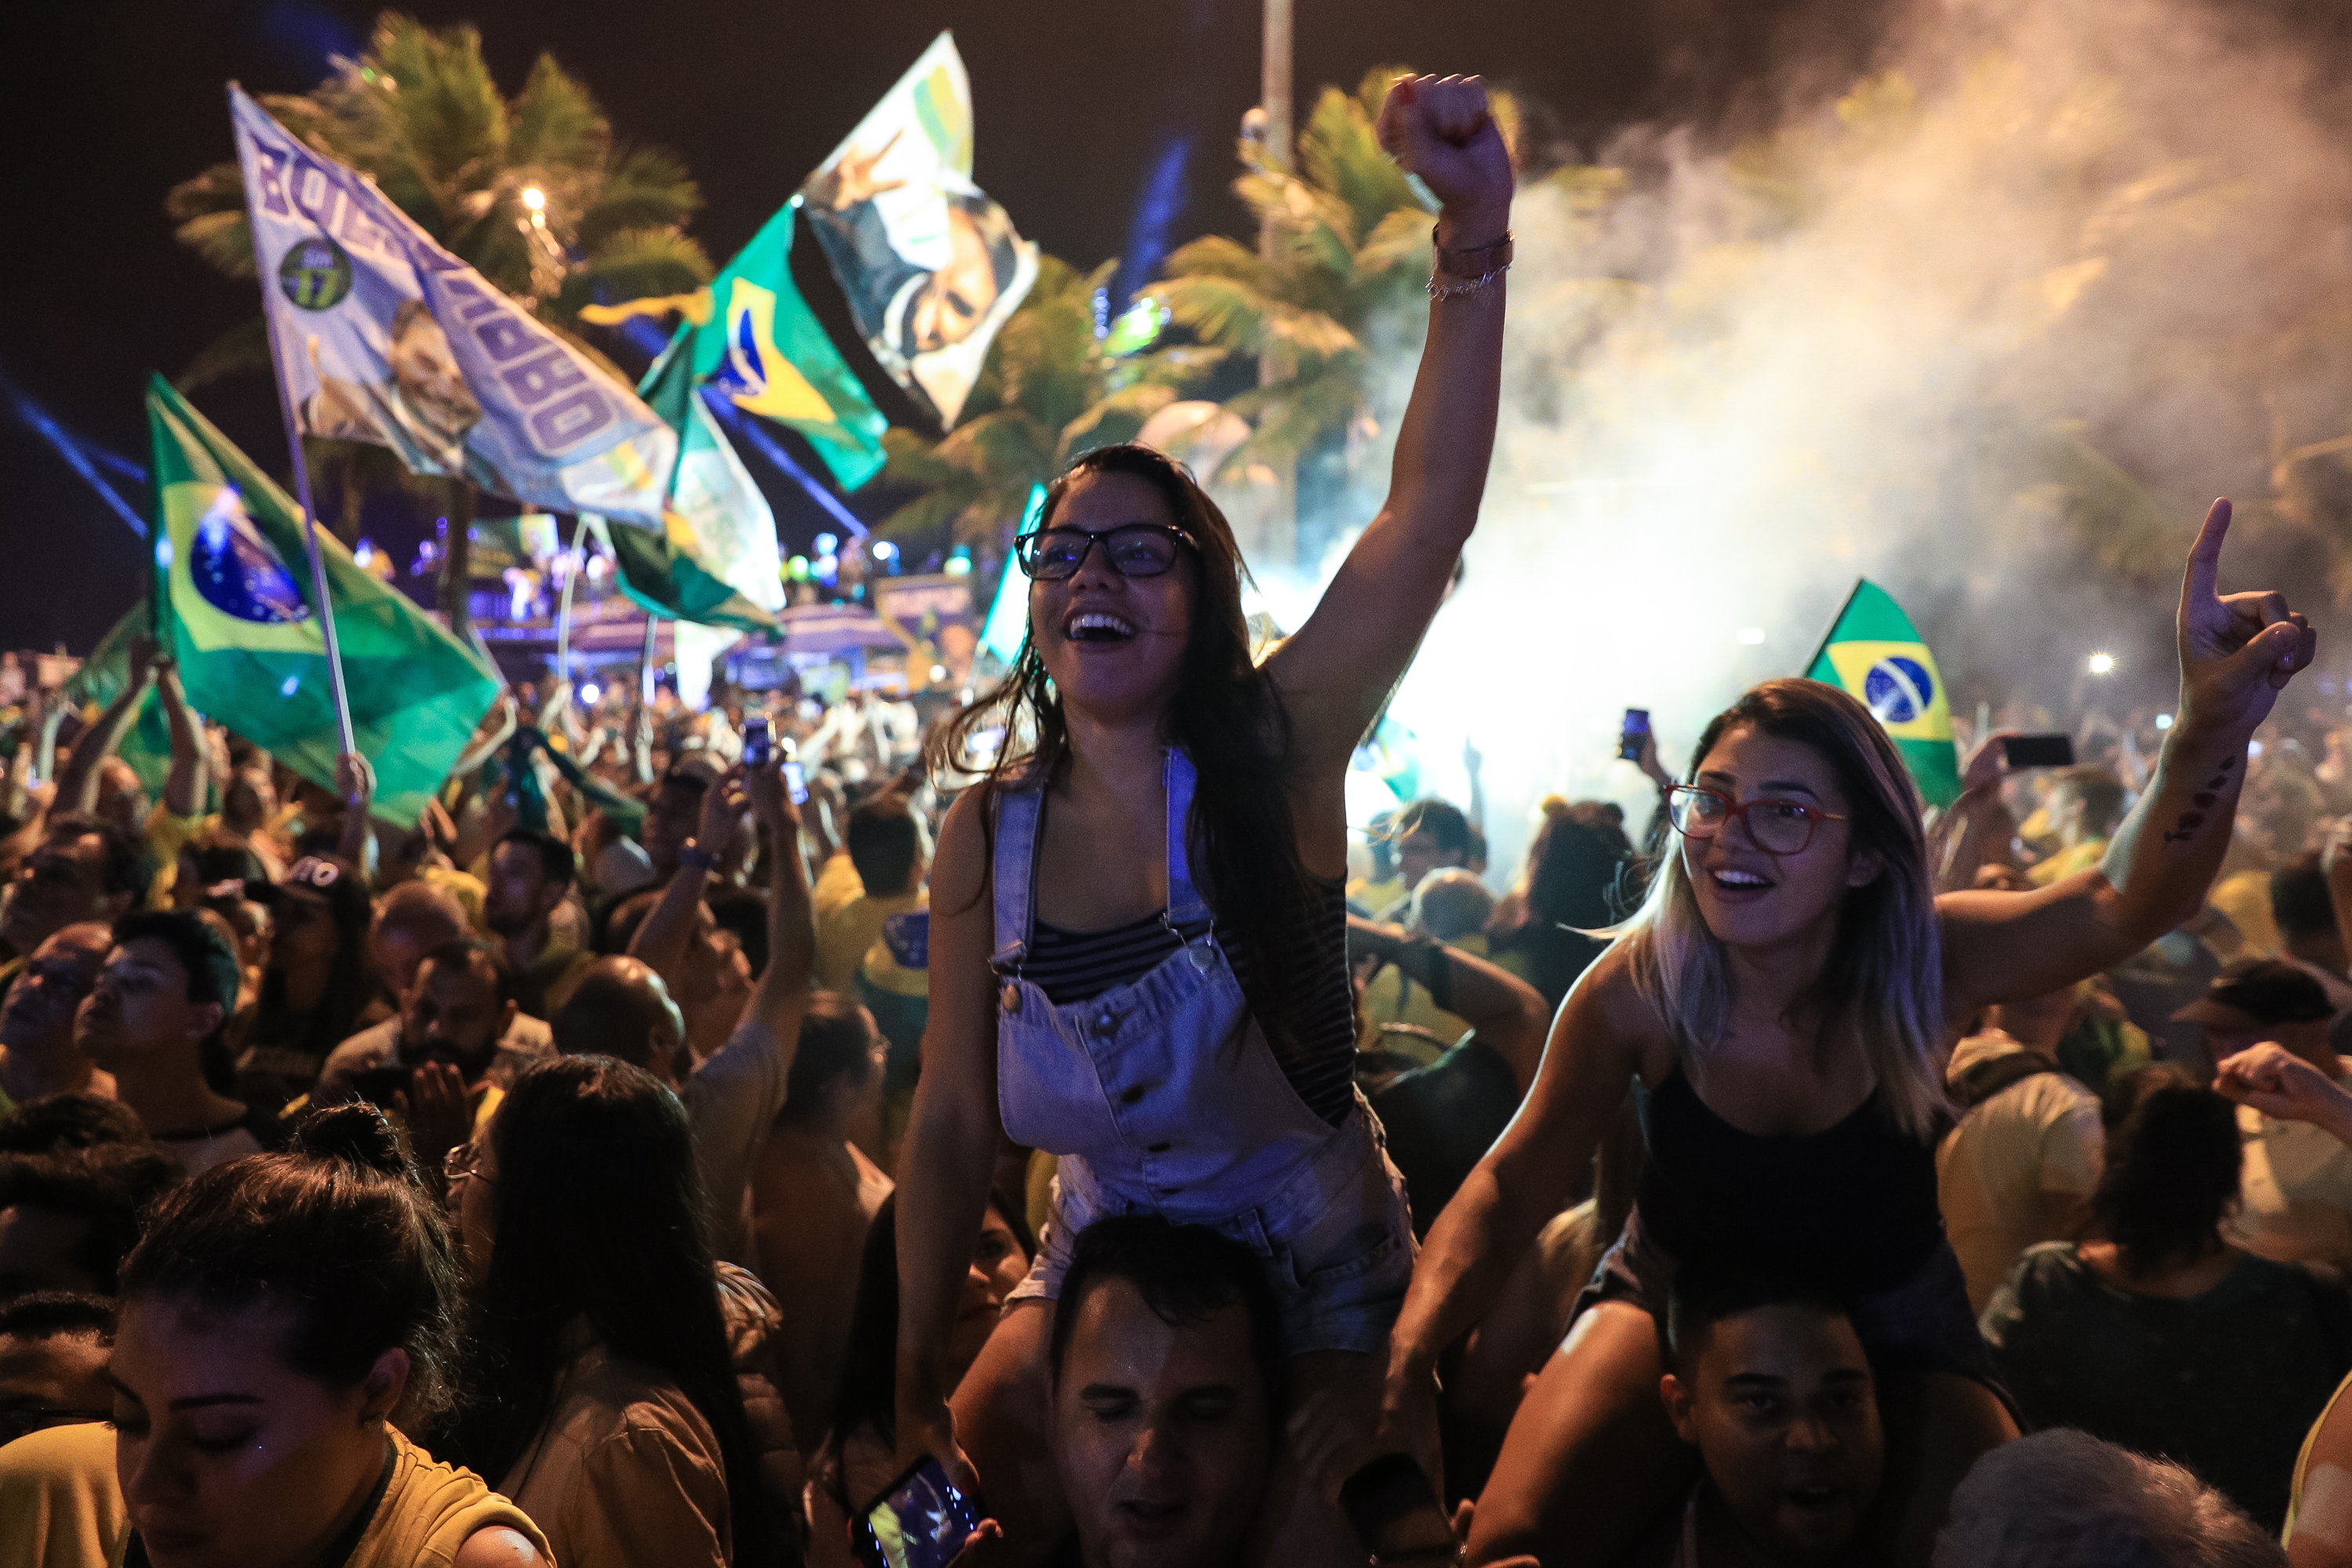 Supporters of far-right presidential candidate Jair Bolsonaro, celebrate in front of his house in Rio de Janeiro, Brazil, after he won Brazil's presidential election, on Oct. 28, 2018 in Rio de Janeiro, Brazil (Buda Mendes—Getty Images)